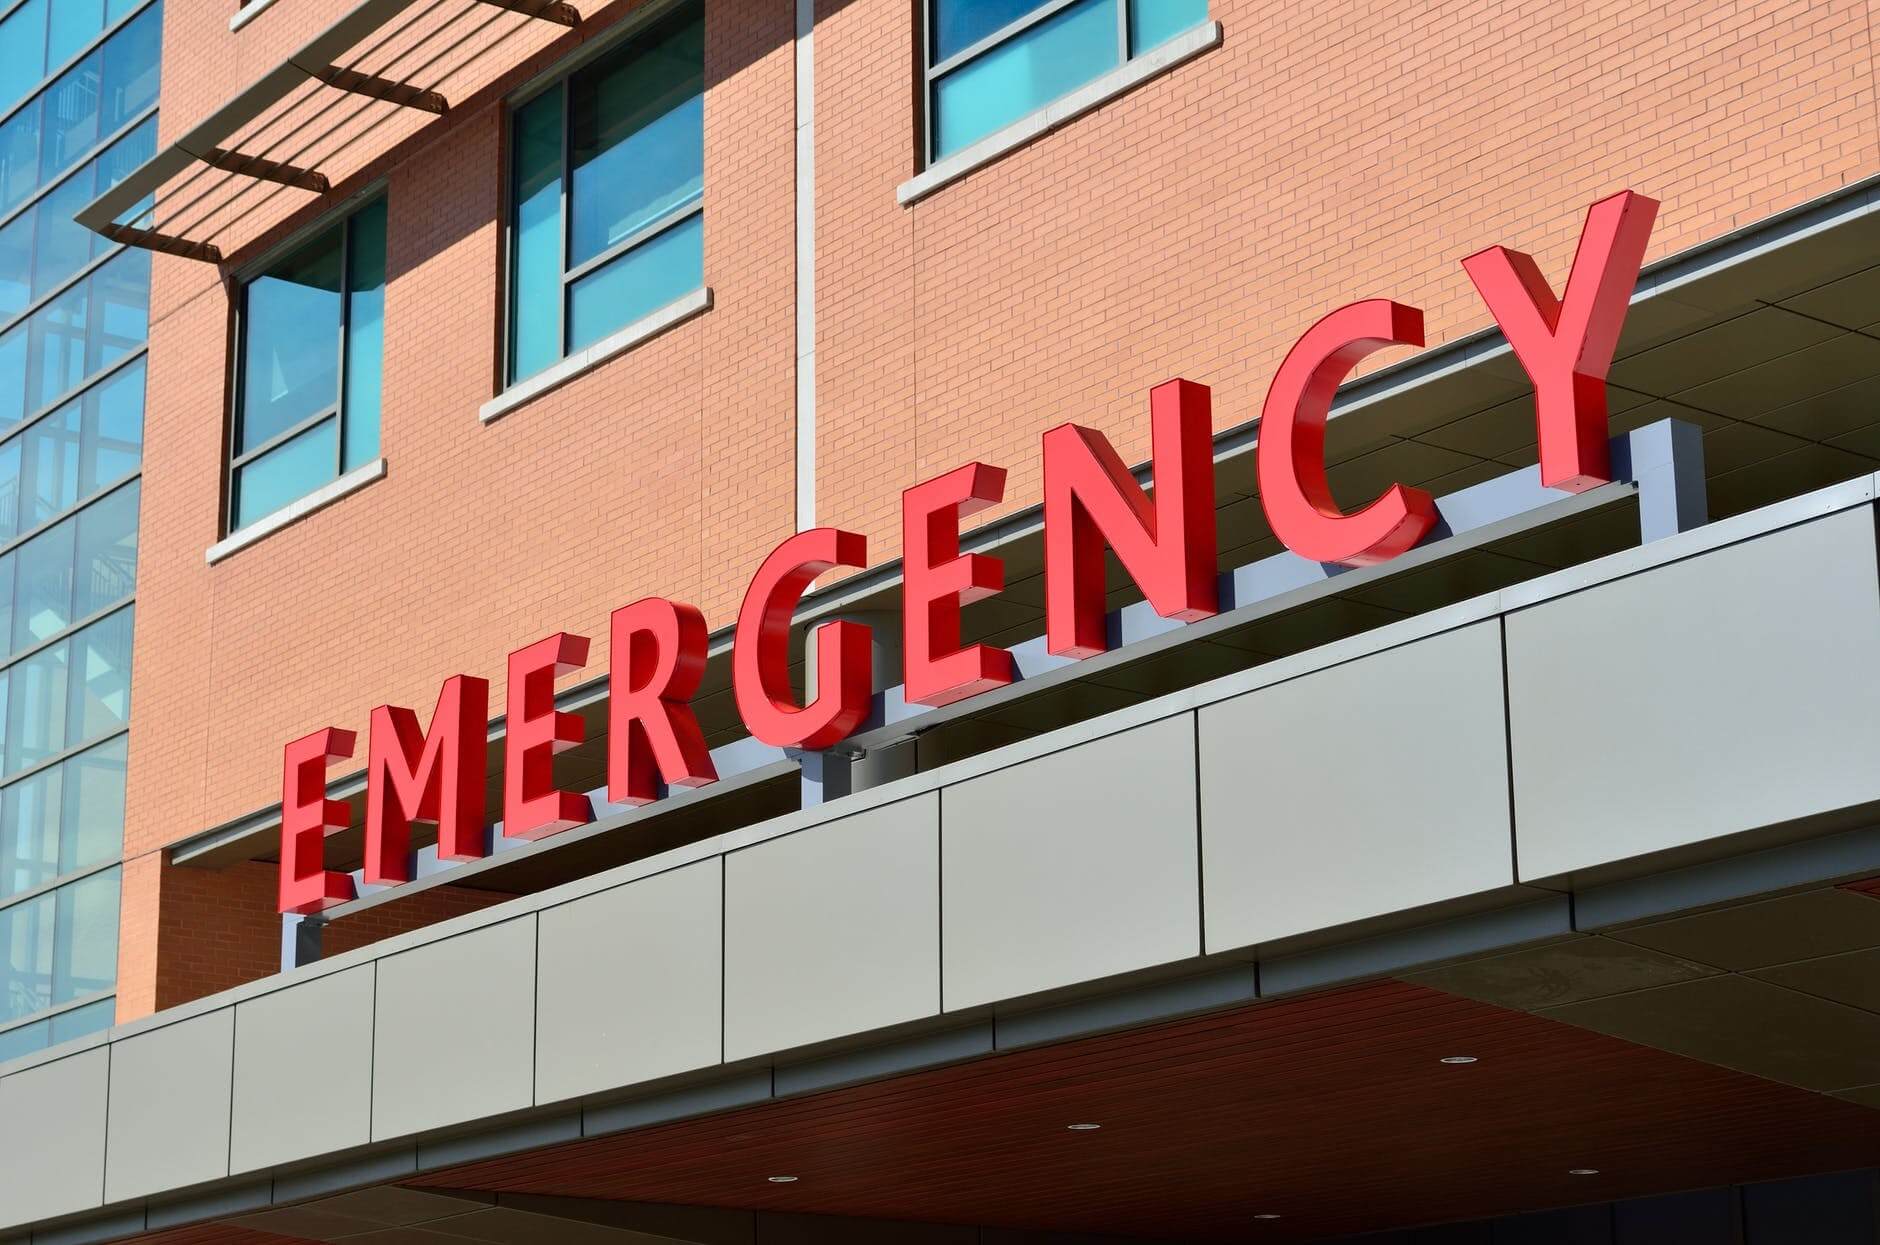 Emergency room sign on building exterior